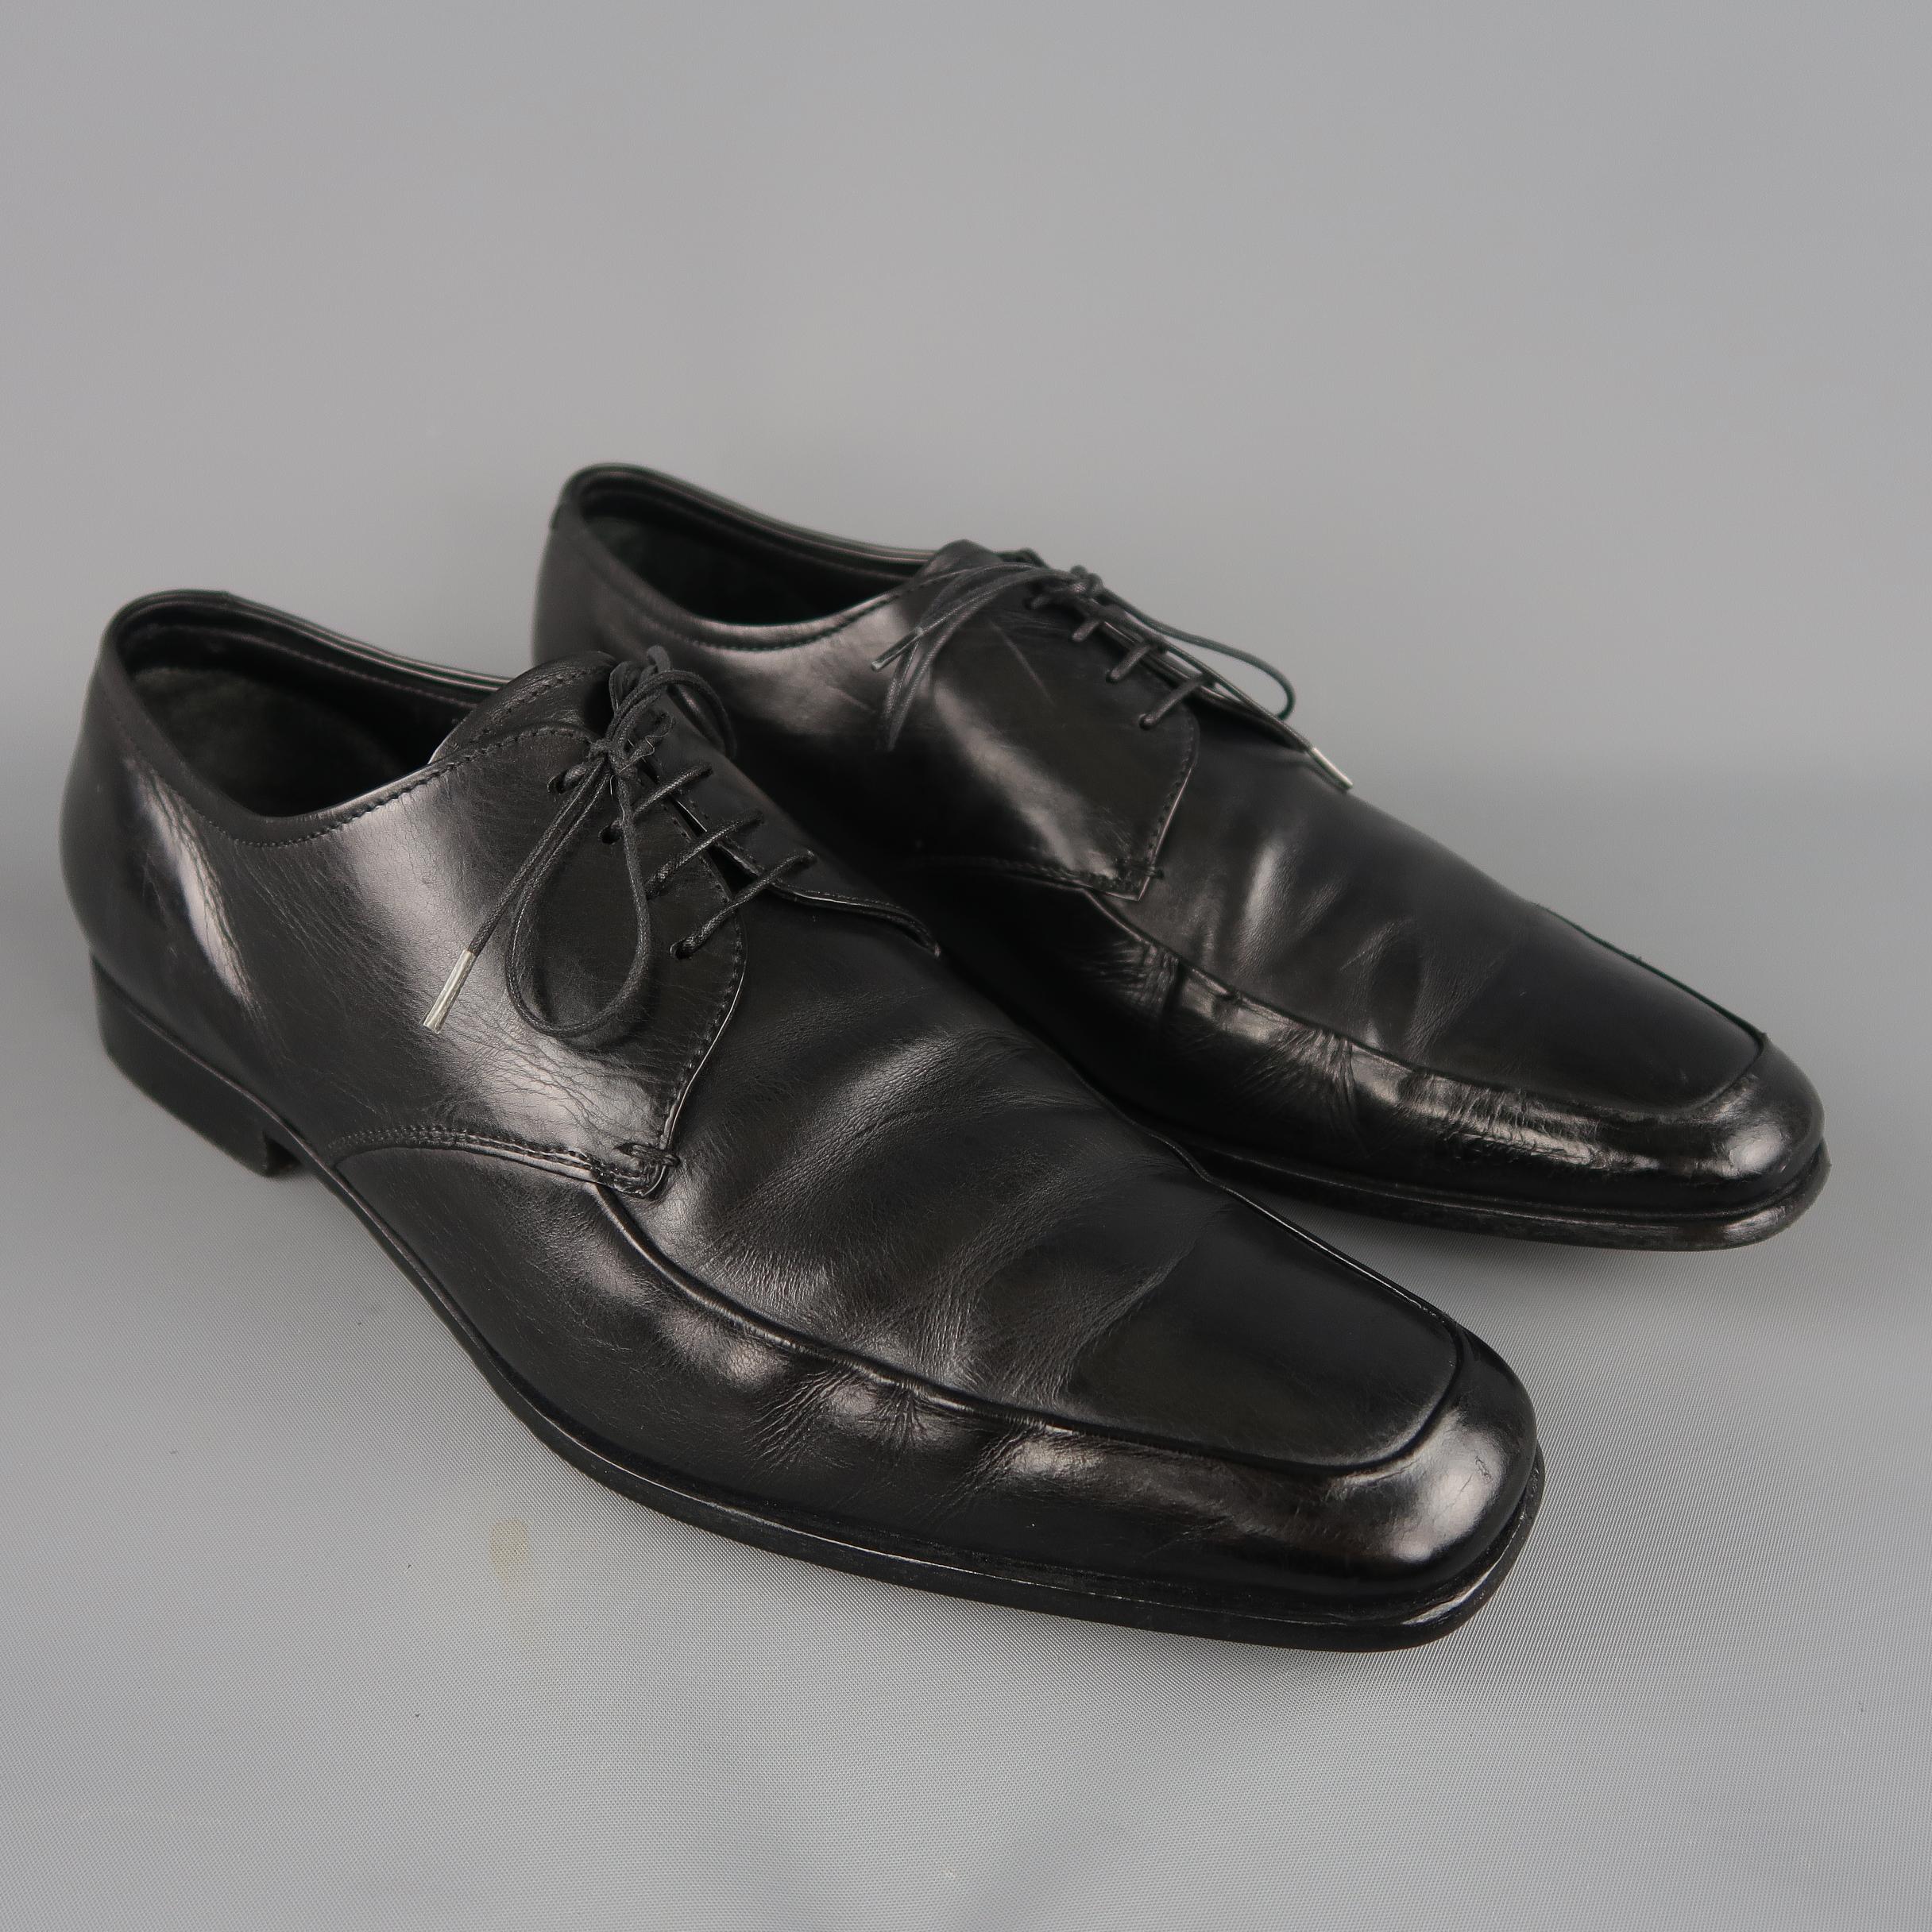 Prada dress shoes come in smooth black leather with a tapered pointed apron toe. Made in Italy.
Good Pre-Owned Condition.
Marked: UK 9.5